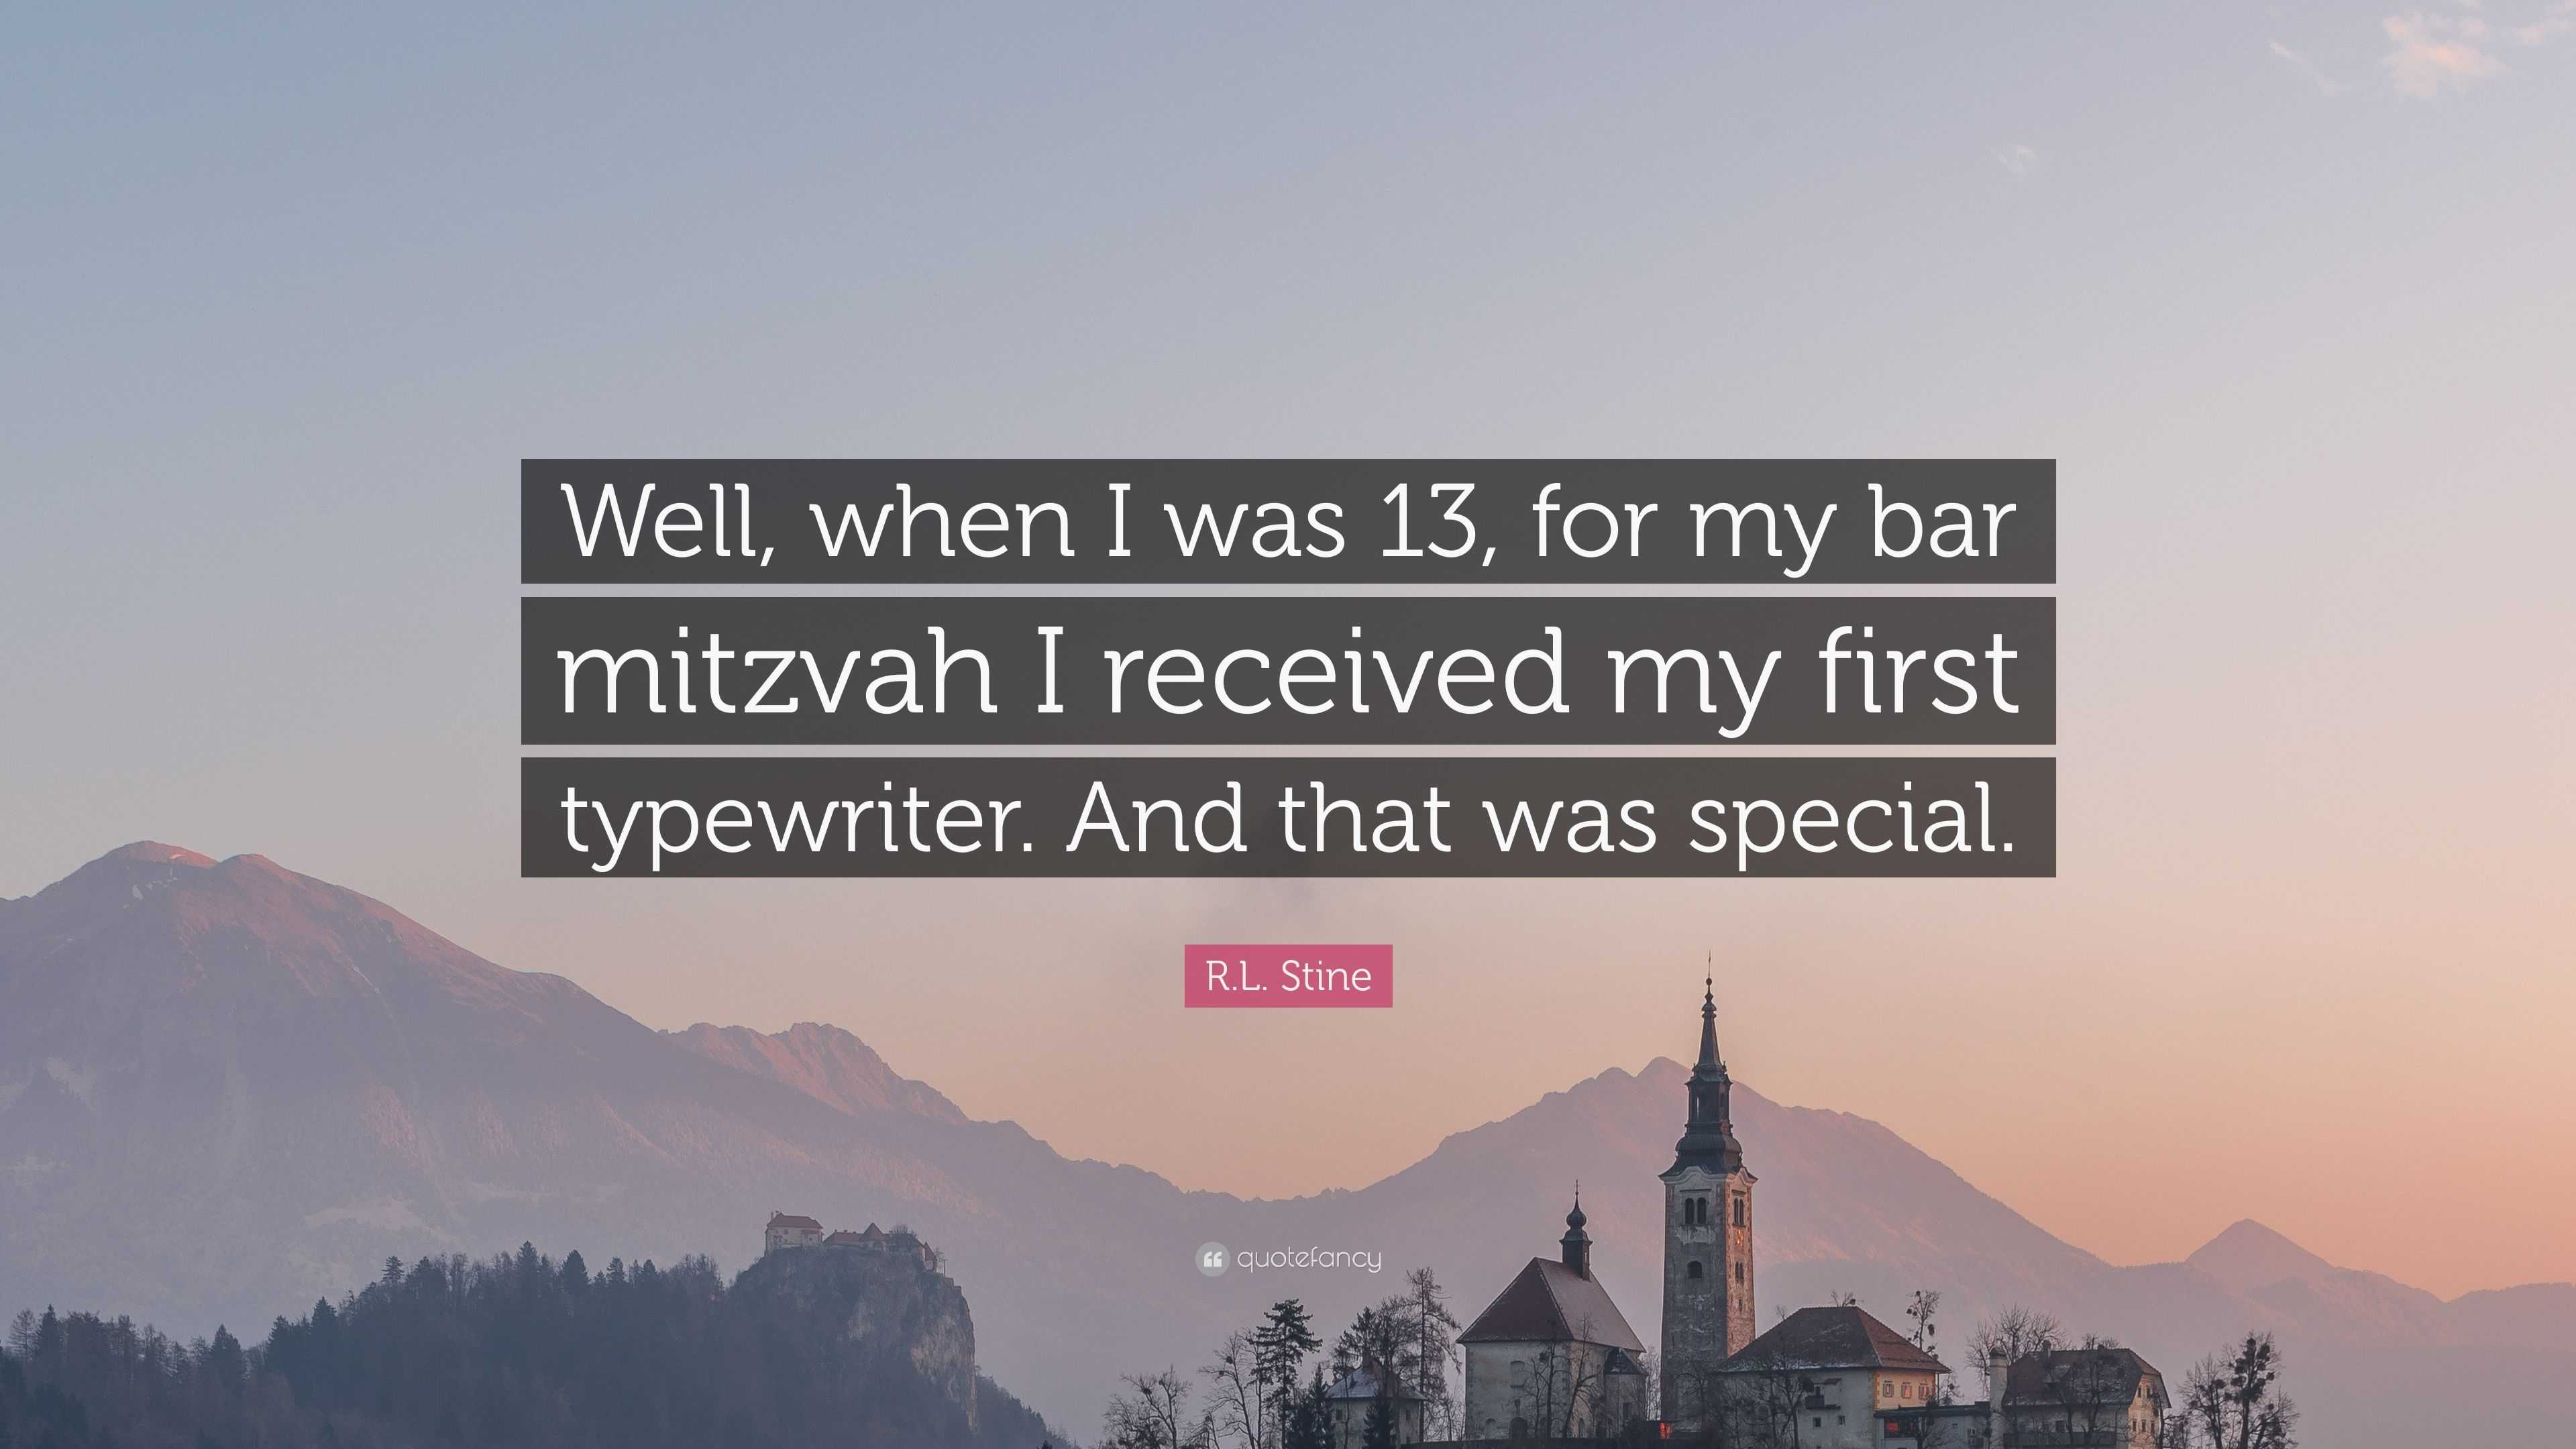 R.L. Stine Quote: “Well, when I was 13, for my bar mitzvah I received my  first